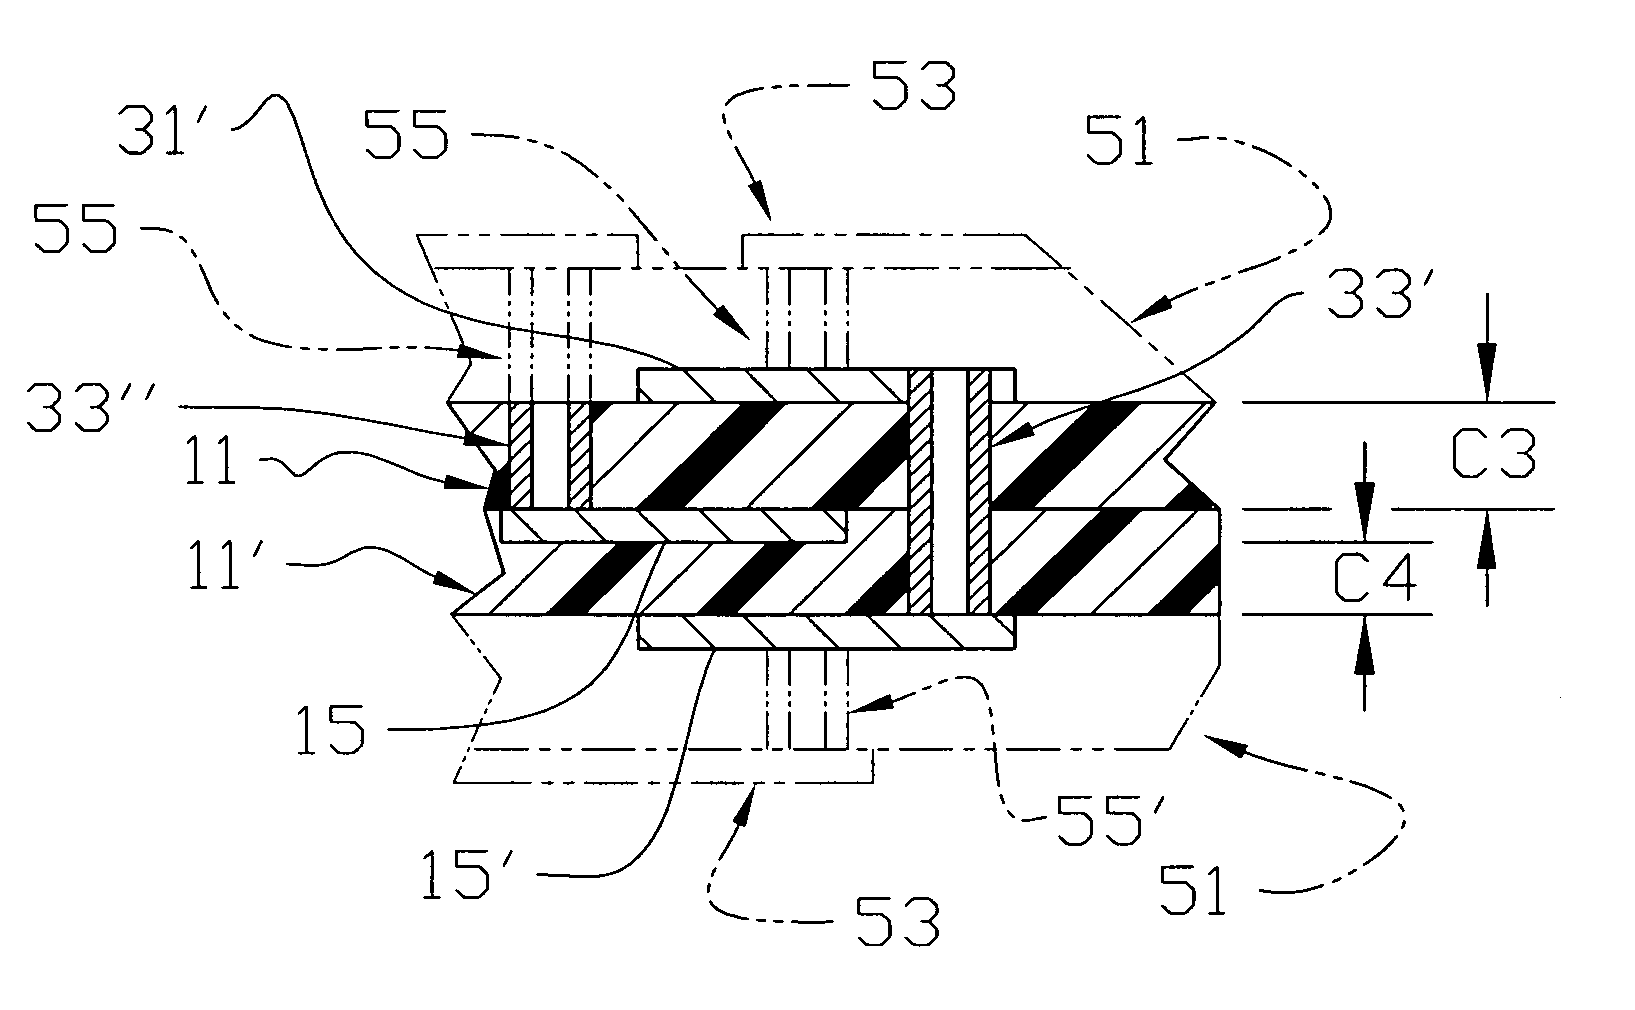 Method of making an internal capacitive substrate for use in a circuitized substrate and method of making said circuitized substrate